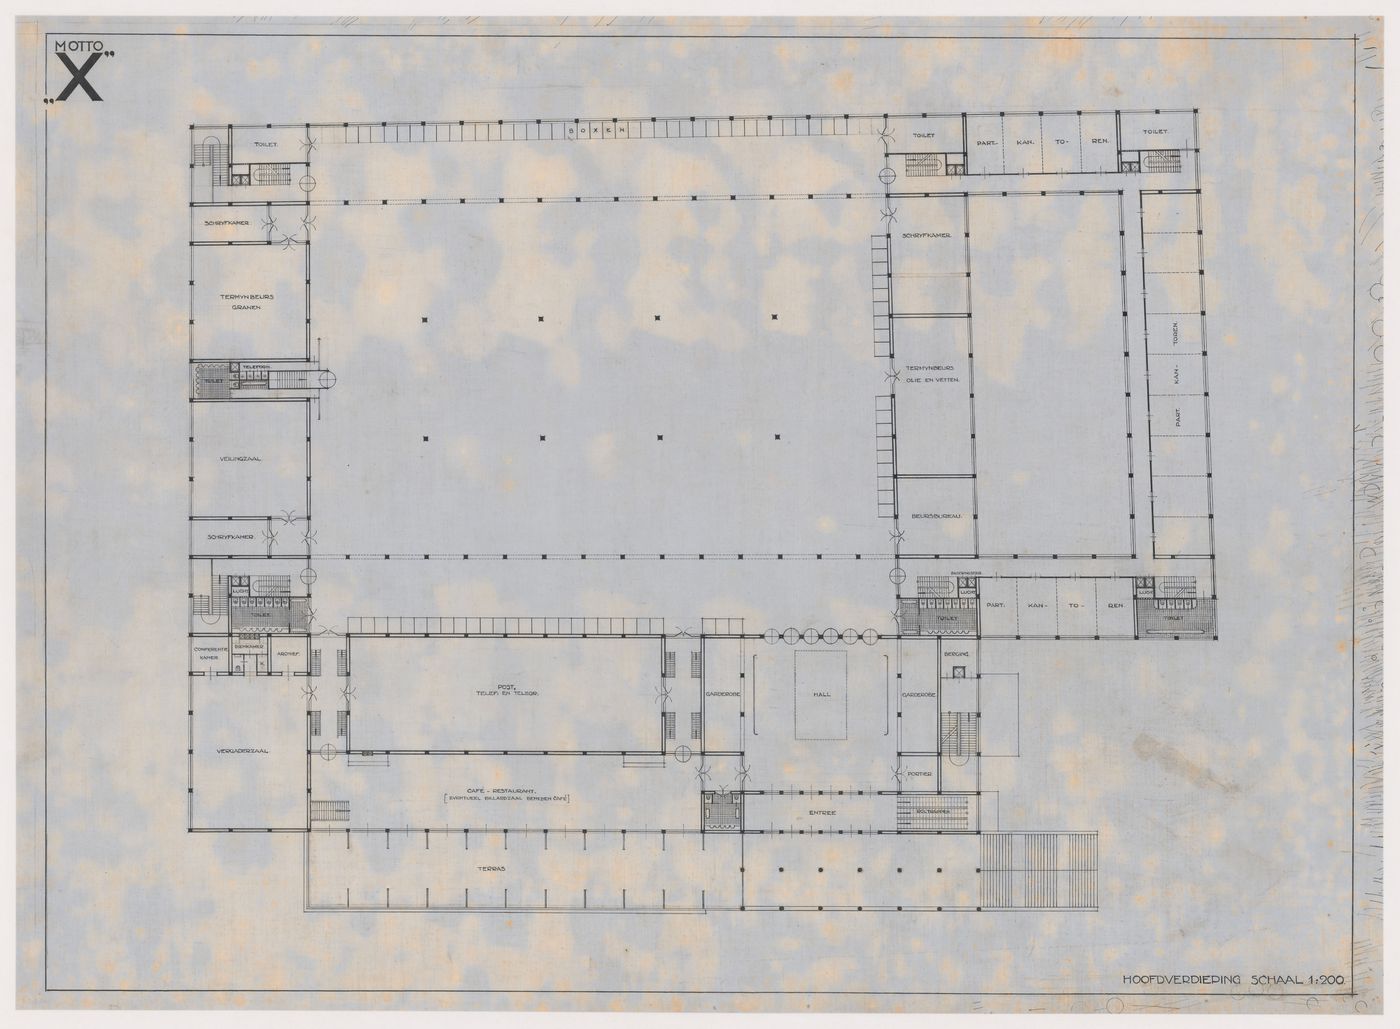 First floor plan for the main level for the New Stock Exchange Building, Rotterdam, Netherlands